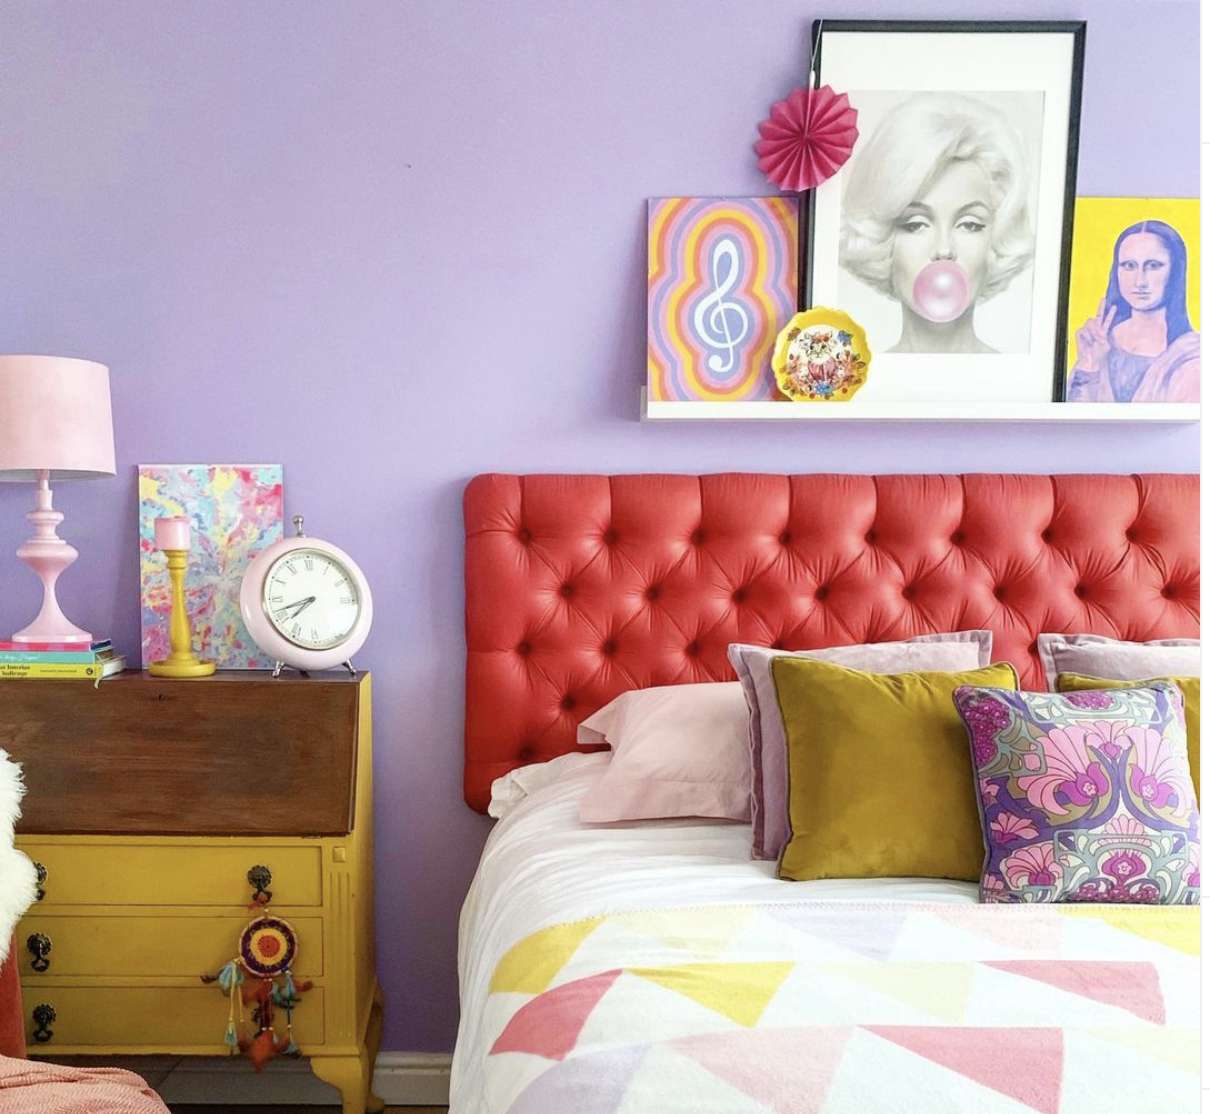 brightly colored eclectic bedroom with purple walls, triangle pattern comforter, vintage style yellow dresser